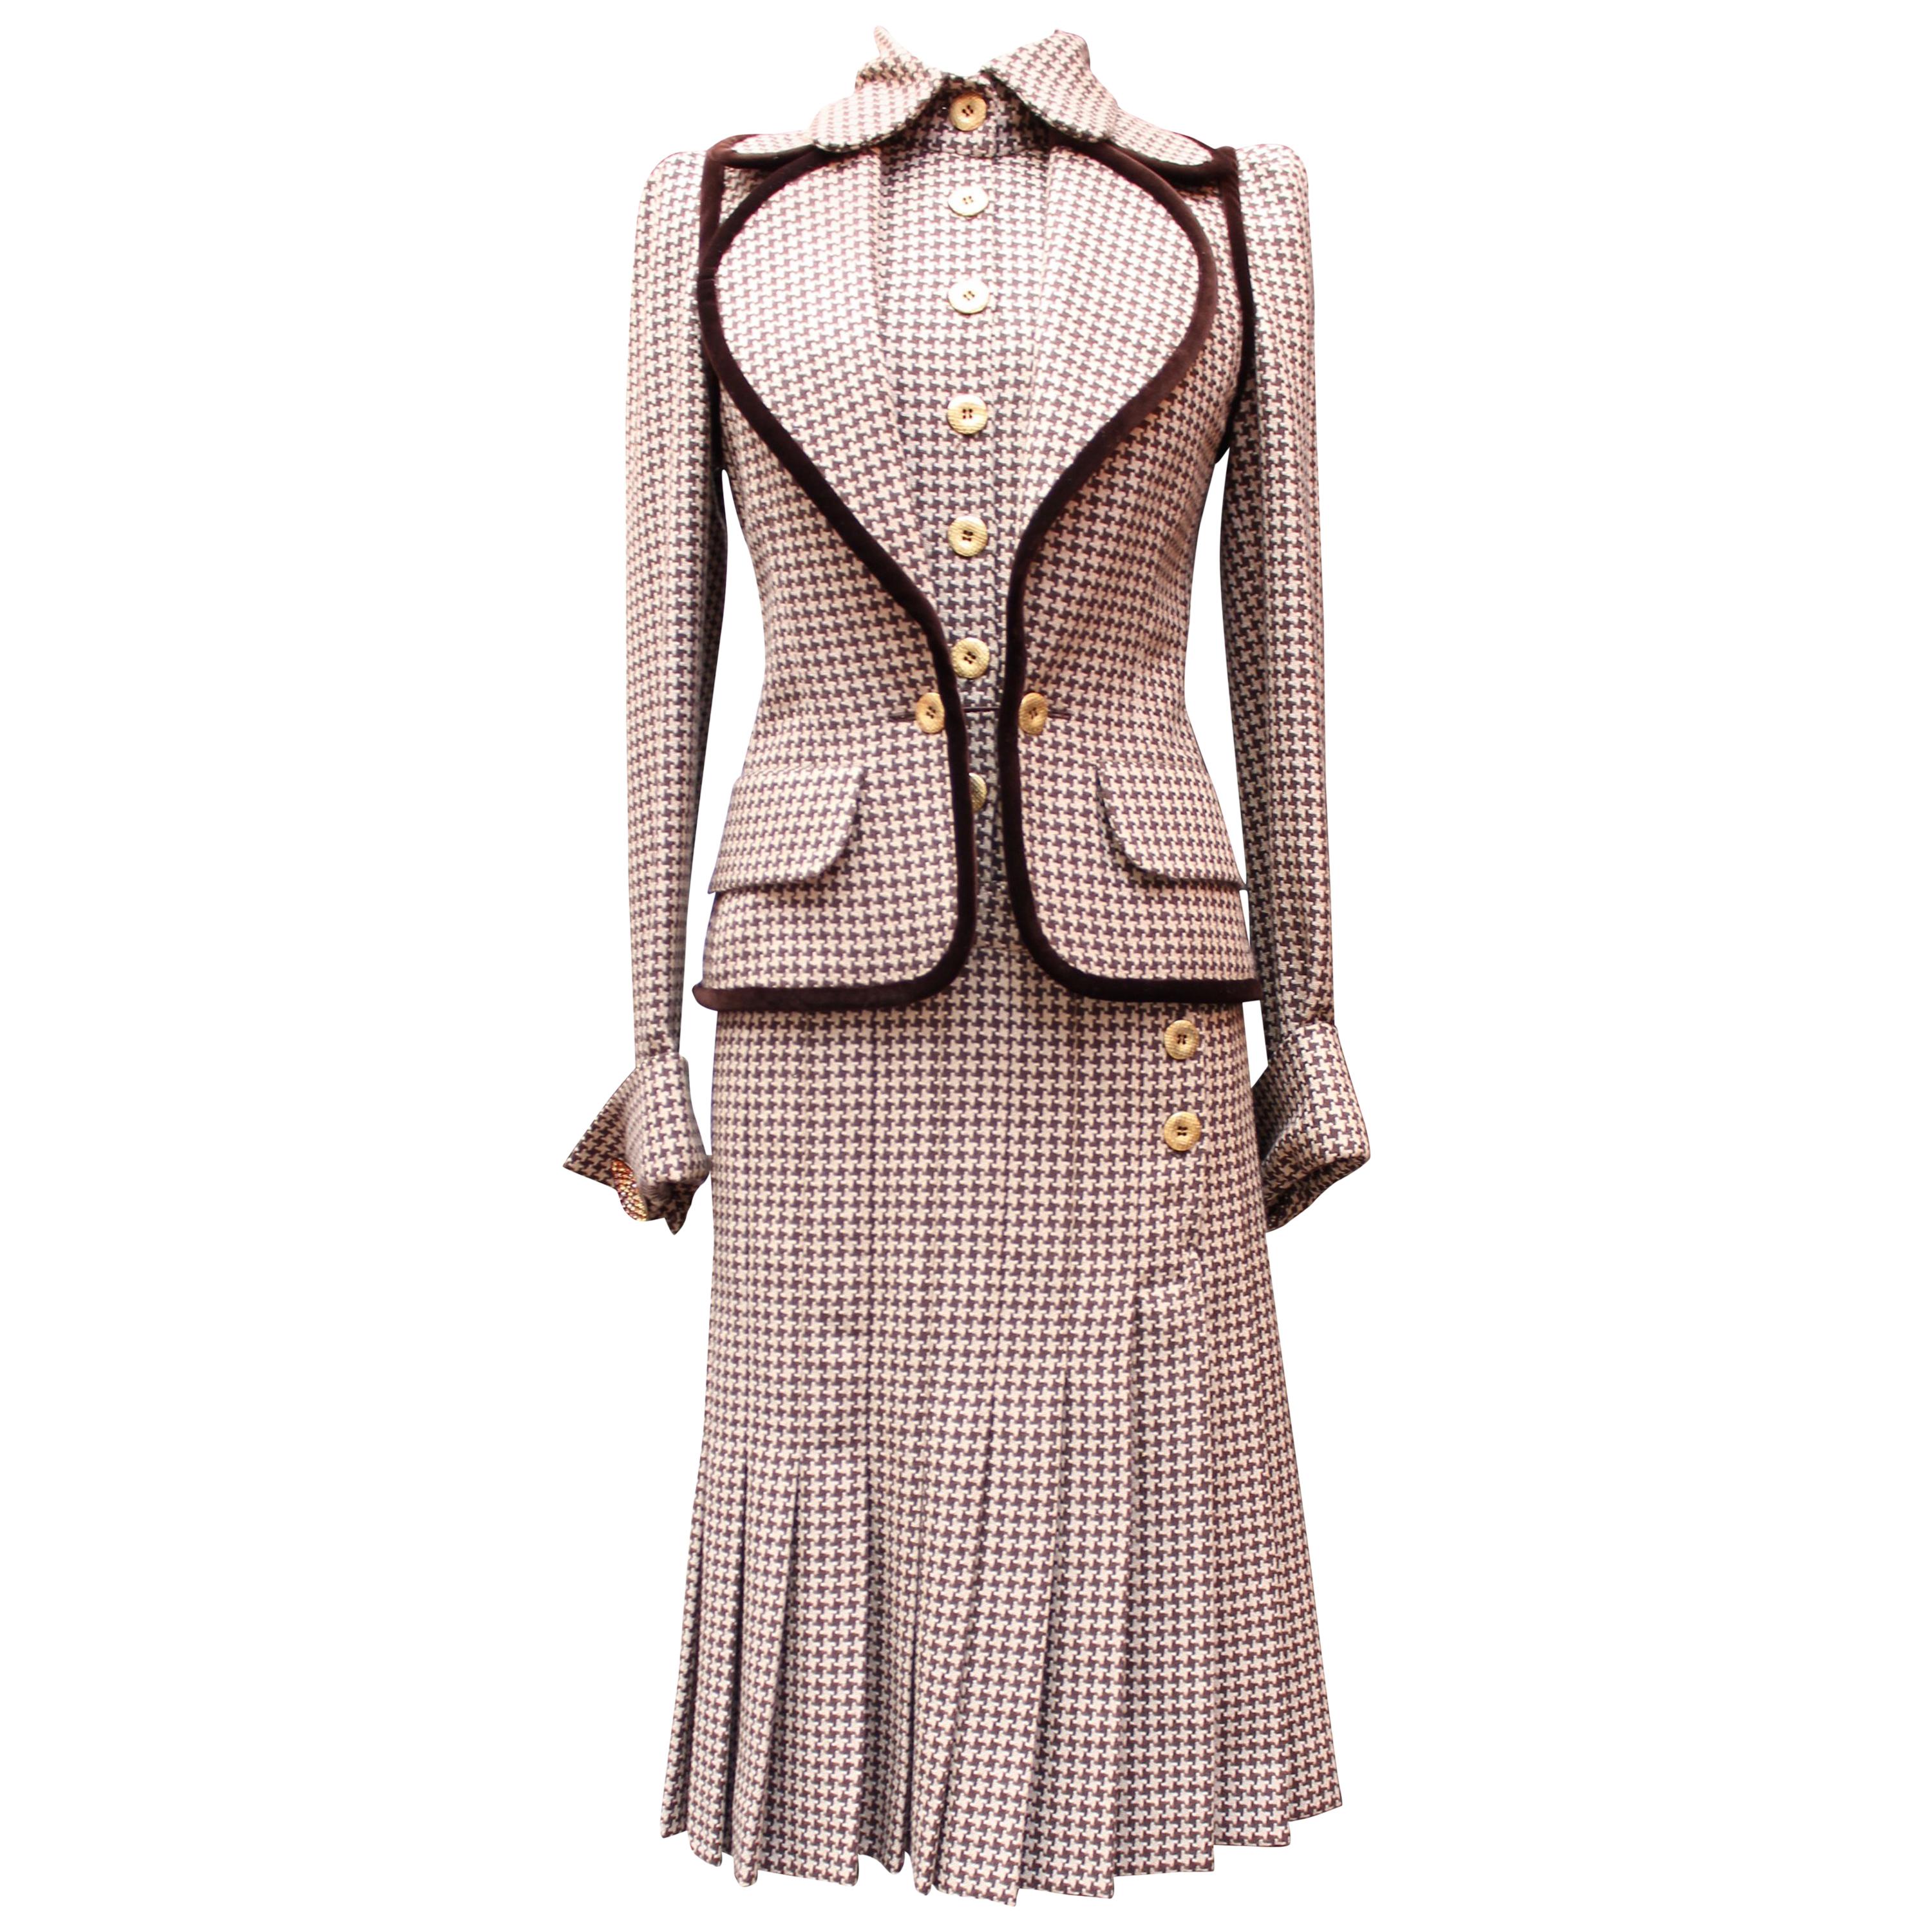 Fall 2004 Jean-Louis Scherrer Houndstooth Dress and Jacket Ensemble For Sale